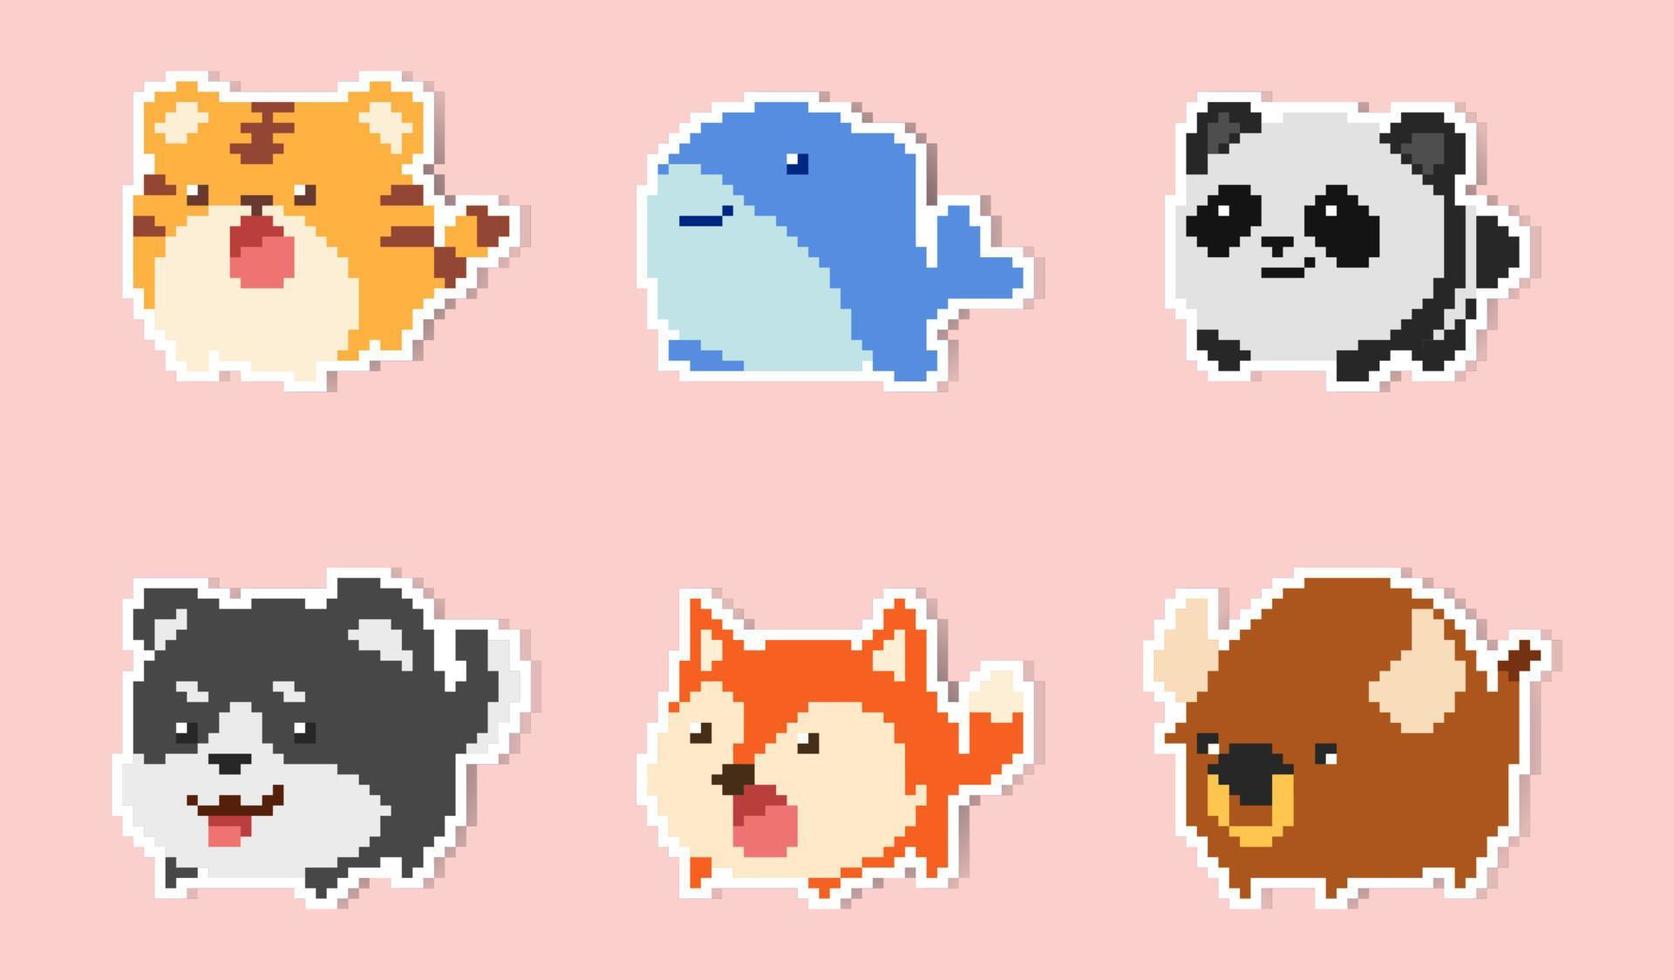 Cute and adorable pixel art style cartoon animal stickers set 2 vector